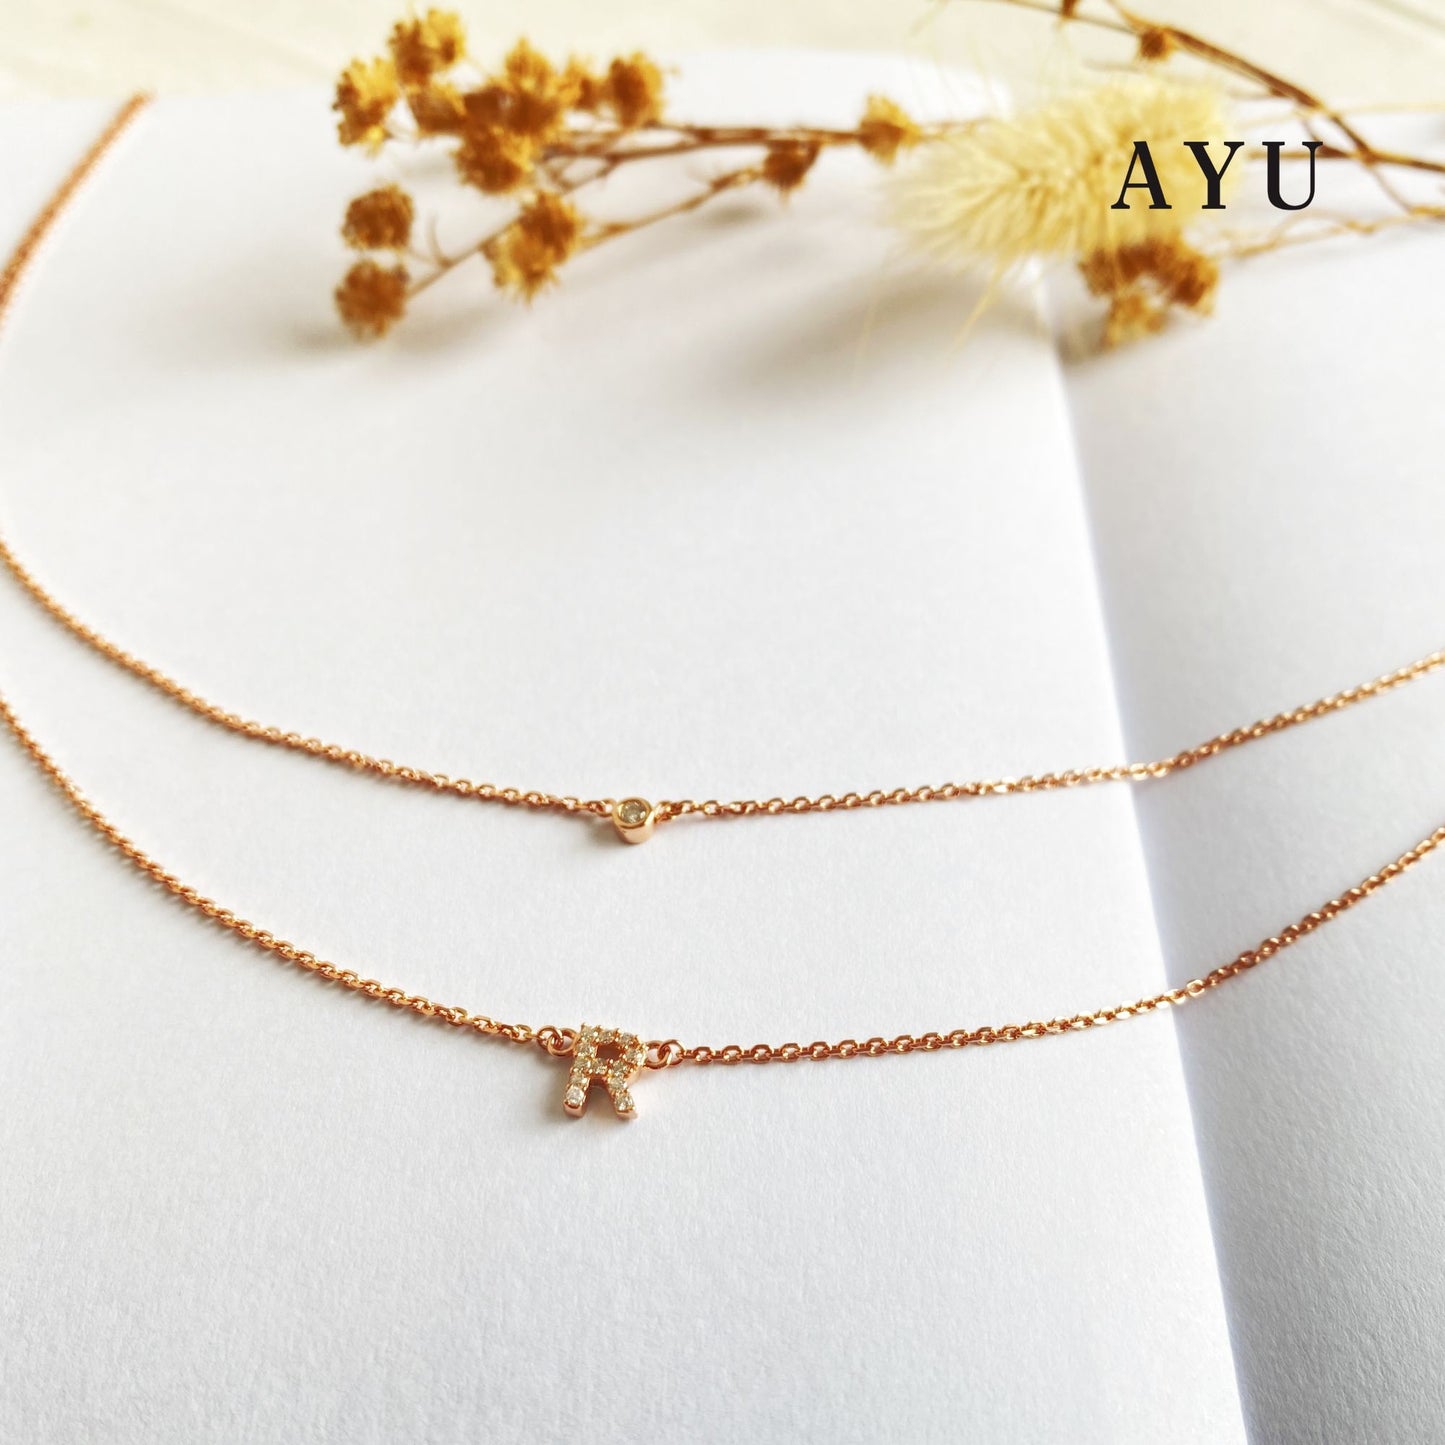 AYU PAVE INITIAL DOUBLE LAYER WITH BEZEL CHAIN NECKLACE 16K YELLOW GOLD